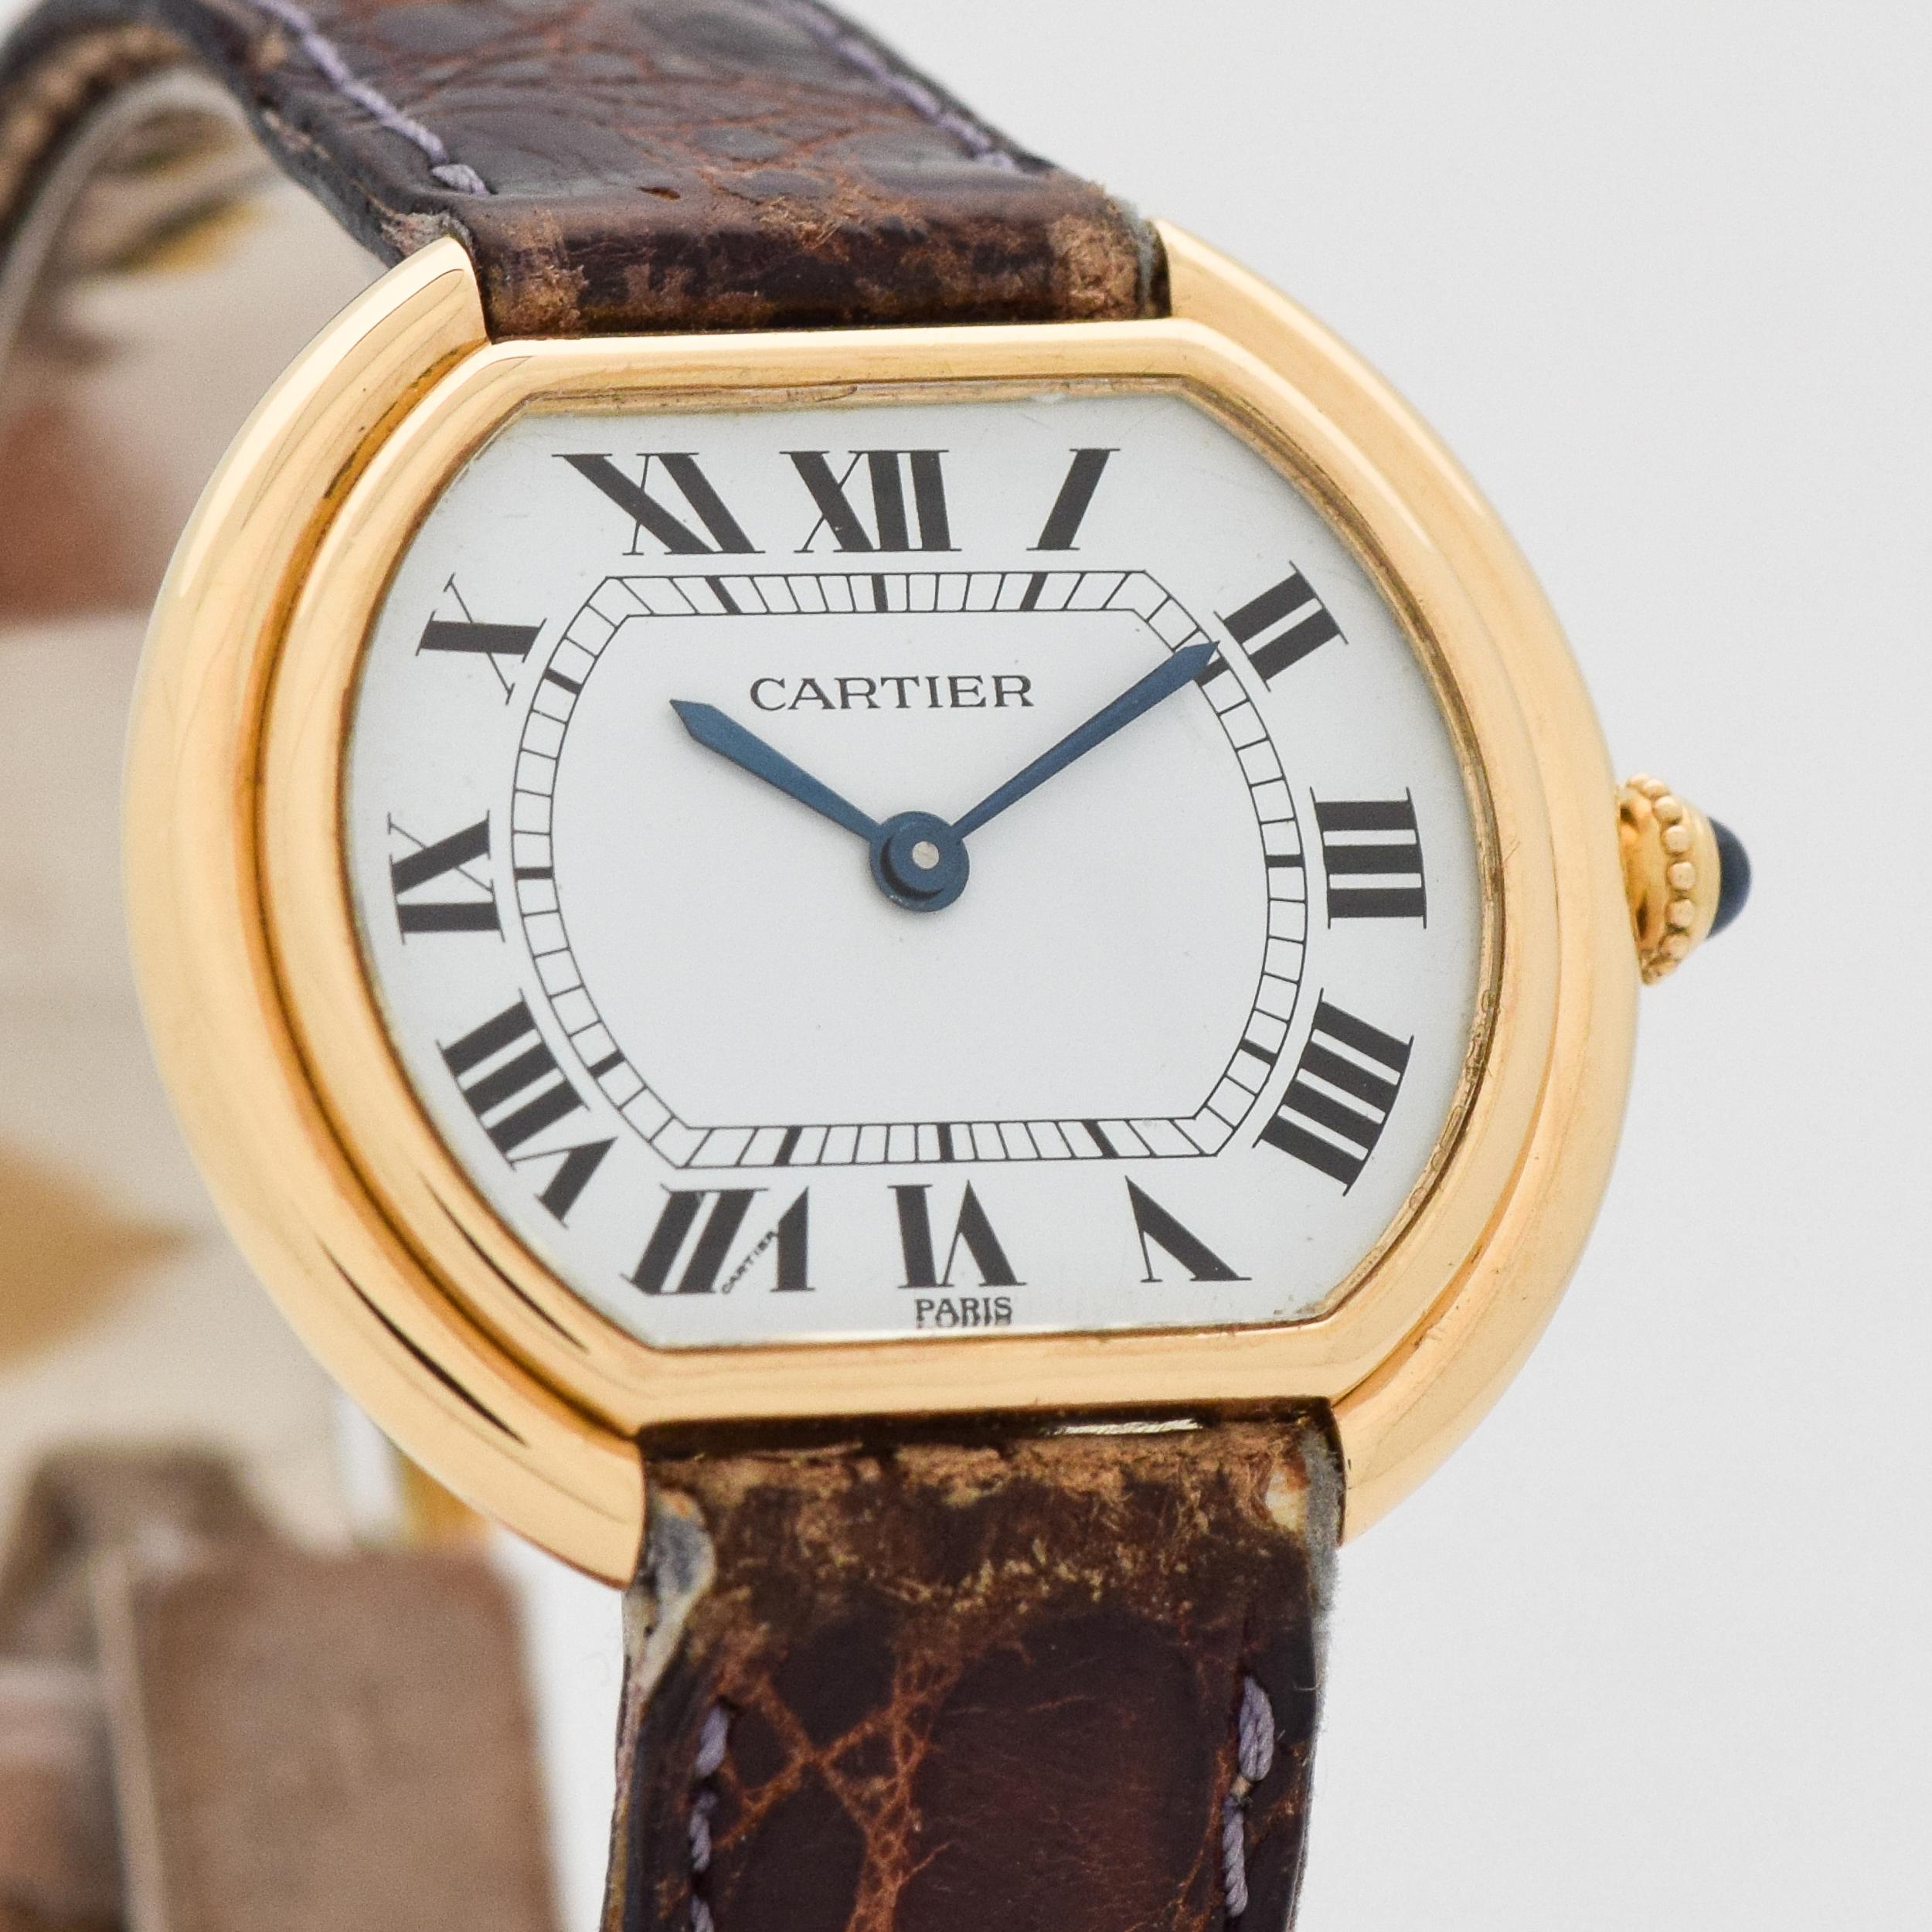 1990's Cartier Ellipse Gondole 18k Yellow Gold watch with Original White Dial with Black Roman Numeral with Original, Well-worn Cartier Crocodile Strap and Buckle. Suitable for a Man or a Woman. 32mm x 27mm lug to lug (1.26 in. x 1.06 in.) 17 jewel,